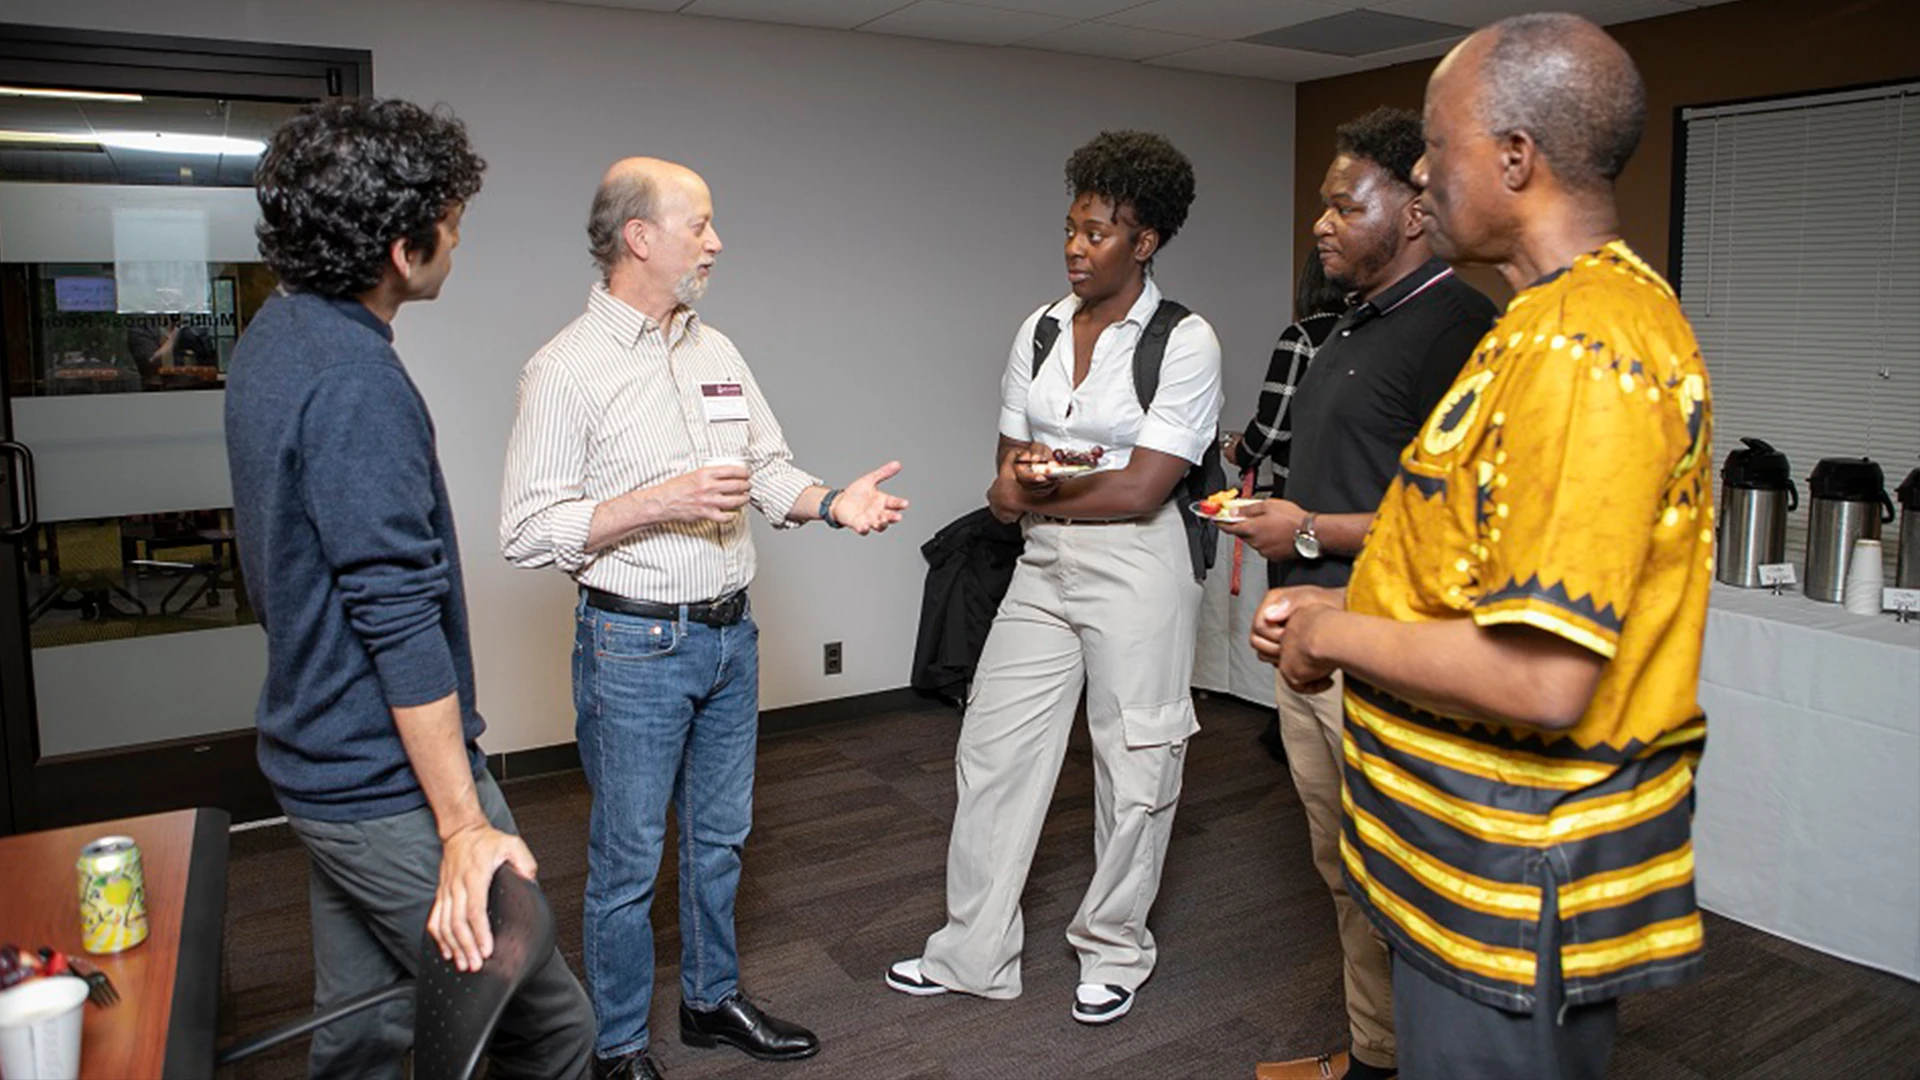 Mount Sinai’s Paul A. Slesinger, PhD, second from left, meets with PhD students from Meharry Medical College and Sanika S. Chirwa, MD, PhD, right. 